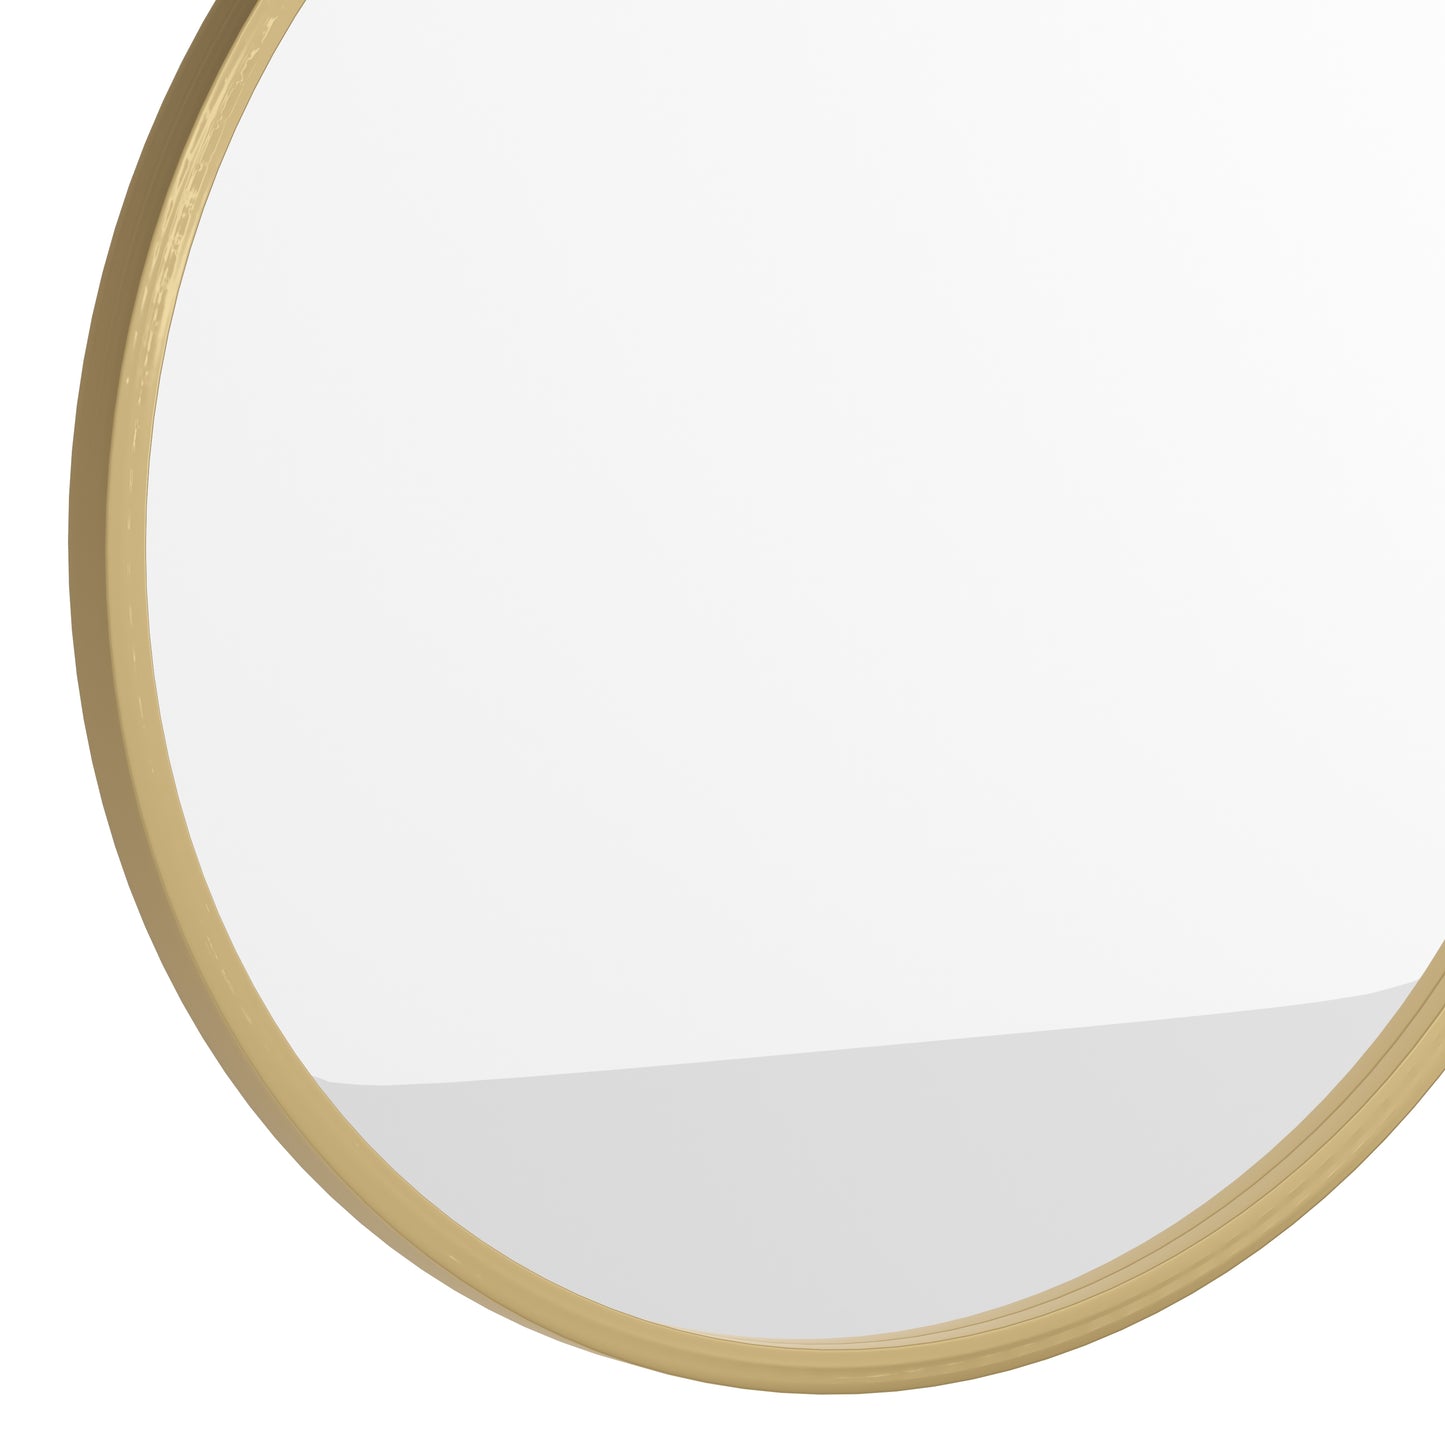 Gold 20" Round Wall Mirror HFKHD-0GD-CRE8-291315-GG